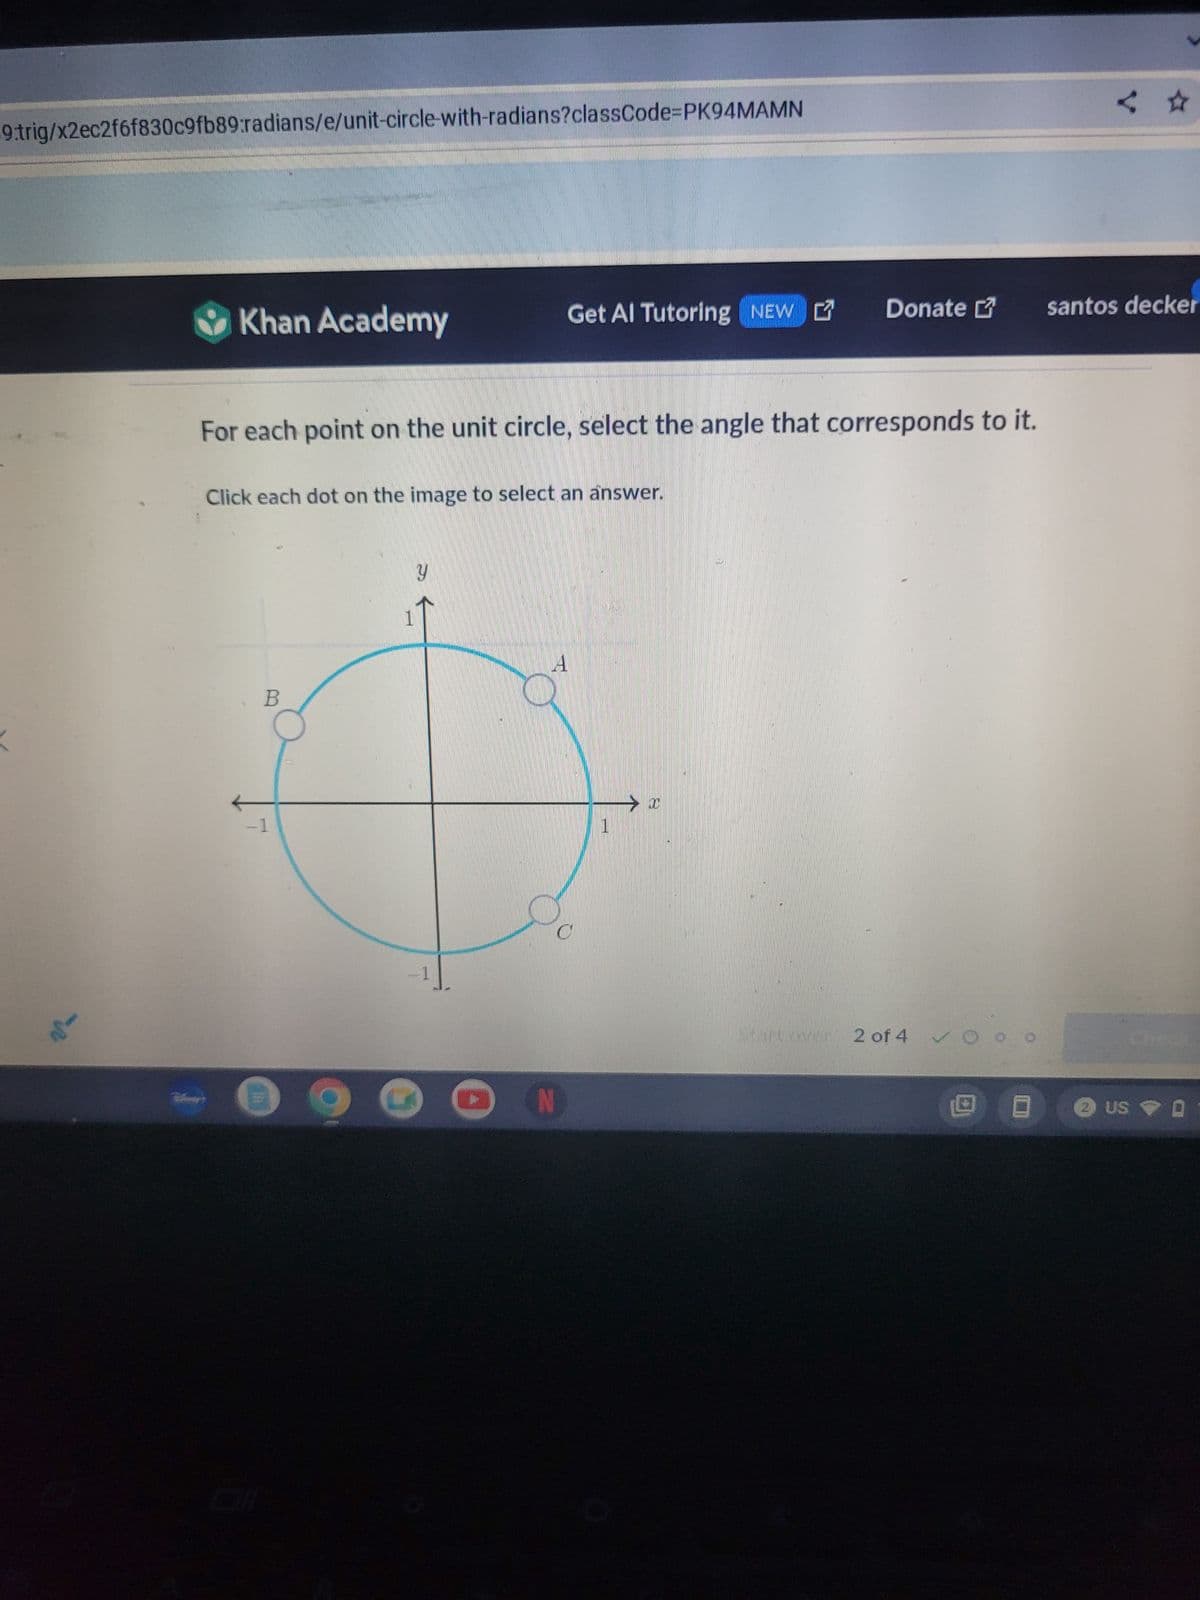 9.trig/x2ec2f6f830c9fb89:radians/e/unit-circle-with-radians?classCode=PK94MAMN
Khan Academy
Get Al Tutoring NEW Donate
santos decker
For each point on the unit circle, select the angle that corresponds to it.
Click each dot on the image to select an answer.
B
1
У
C
N
A
Τ
→ x
Start over
2 of 4 O
Check
回
2 US 0